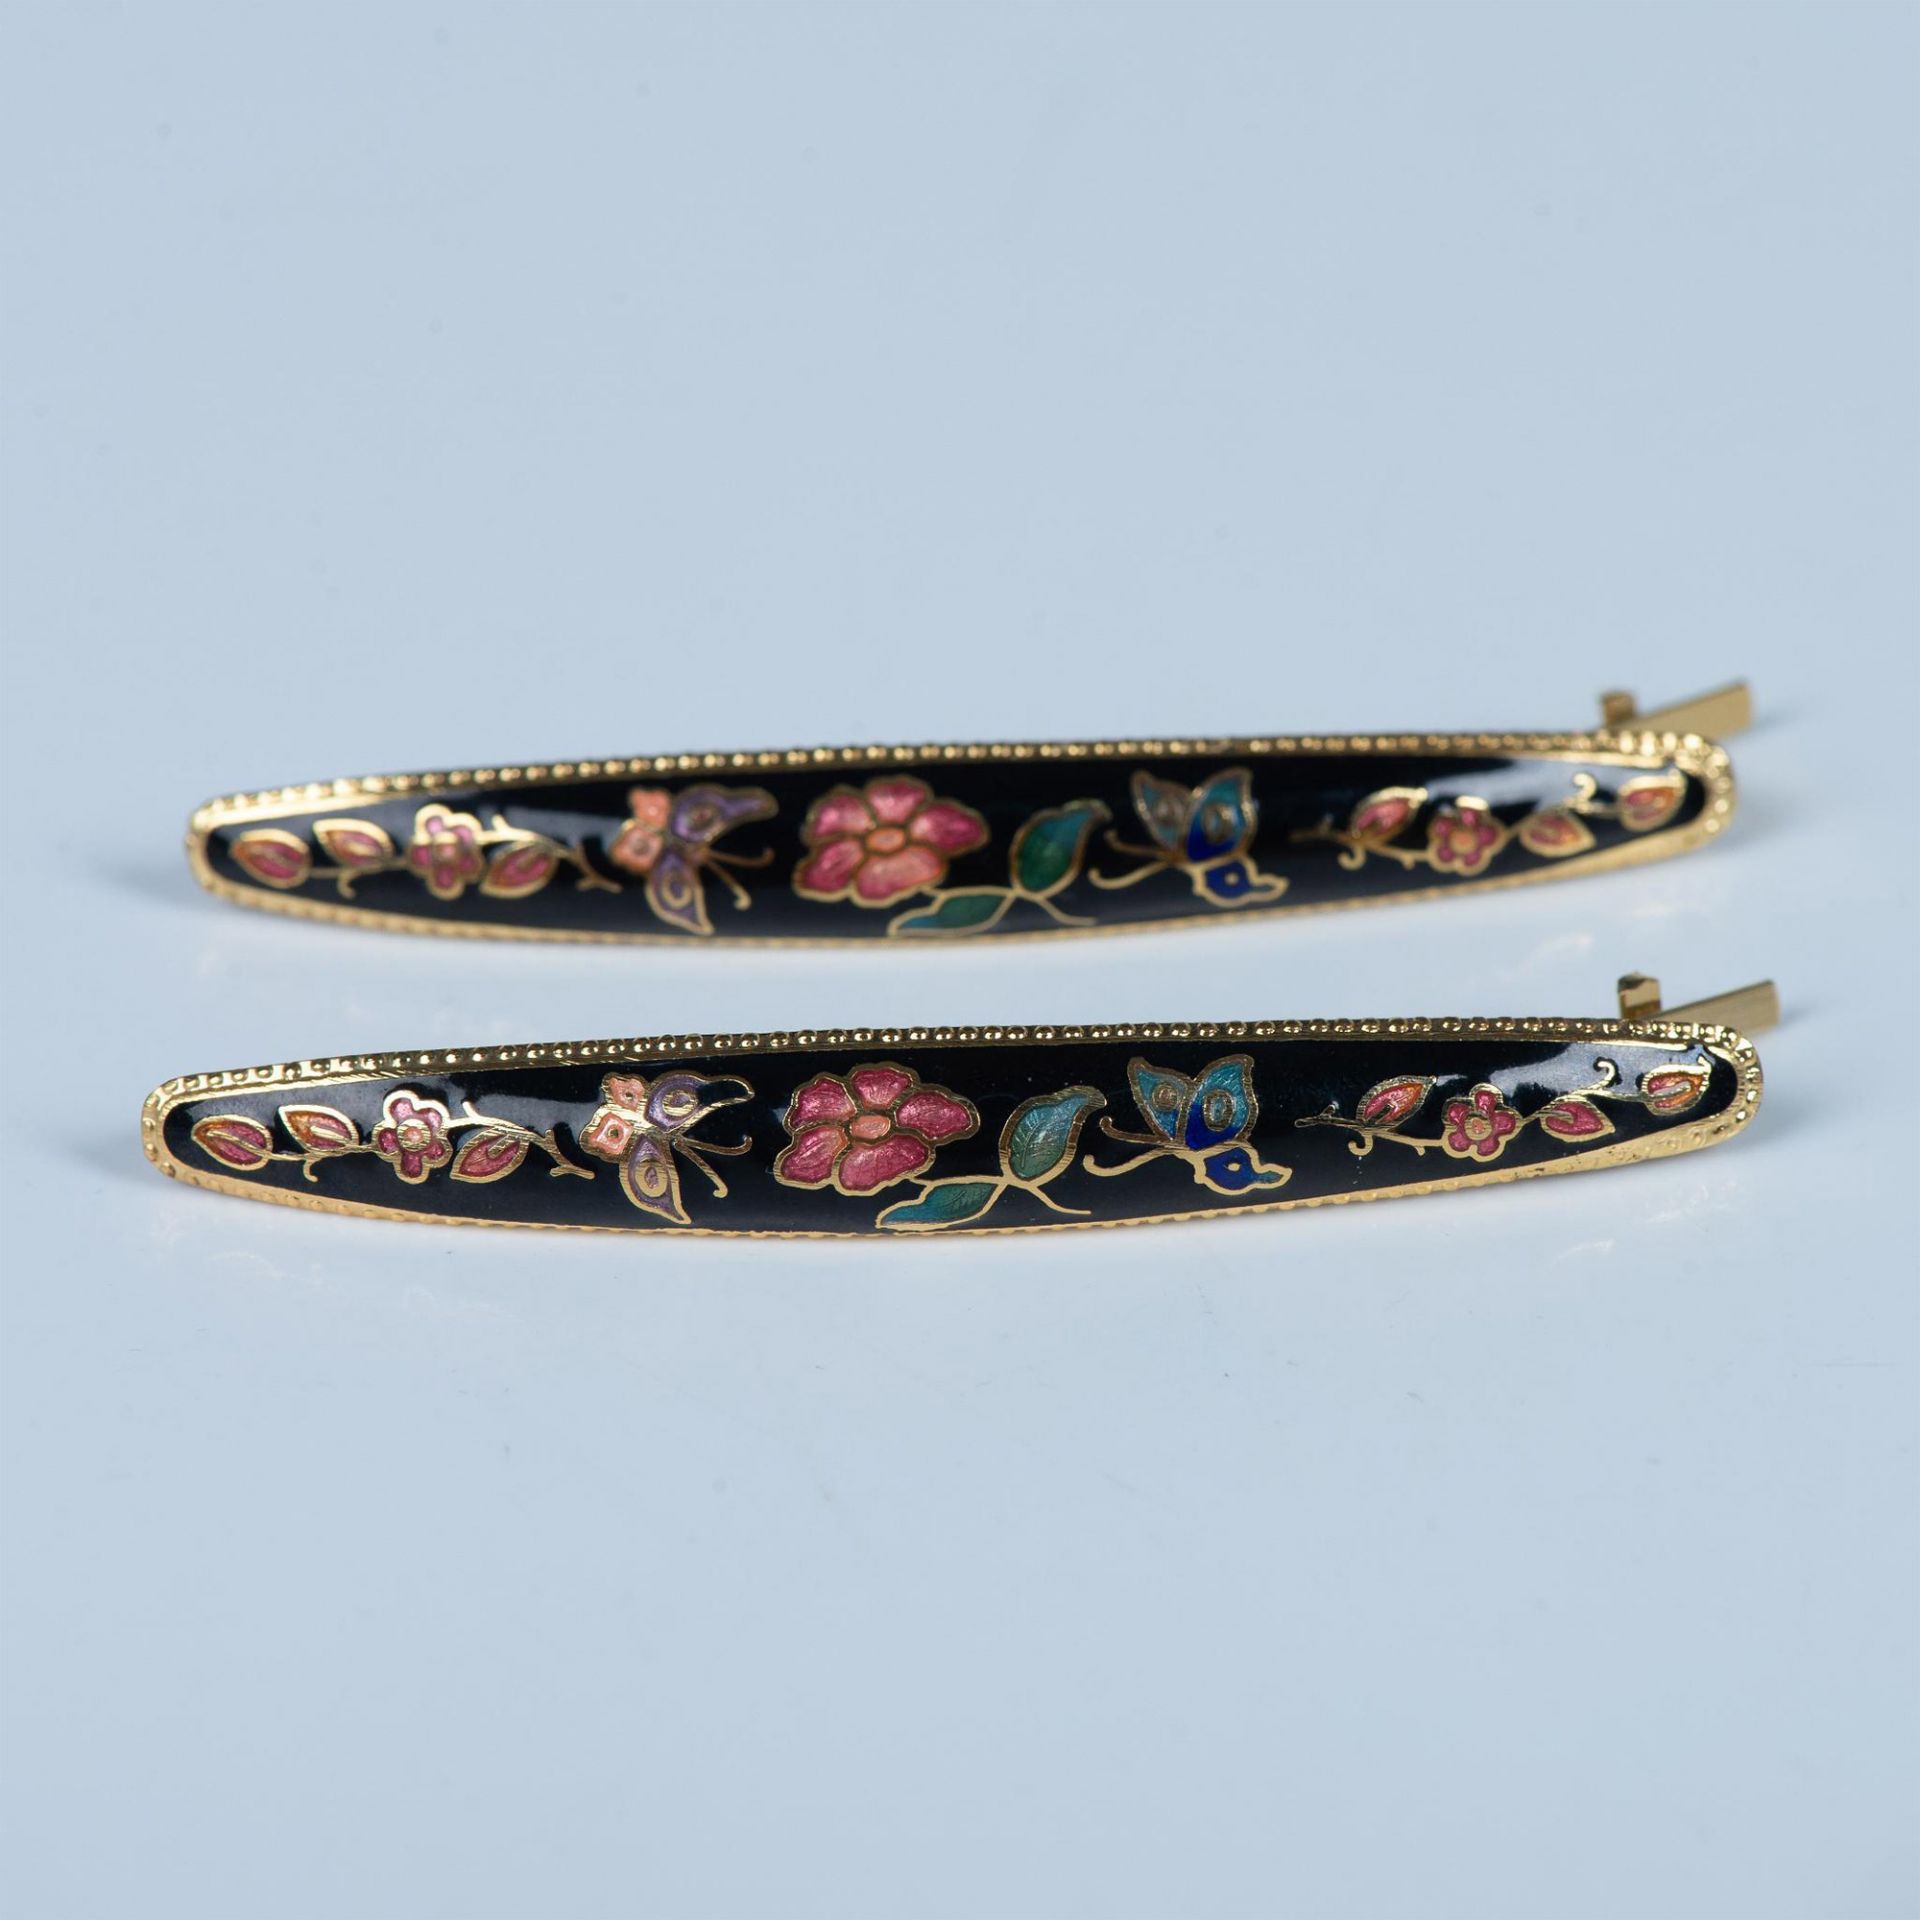 3 Pair of Cloisonne Hair Barrettes - Image 5 of 6